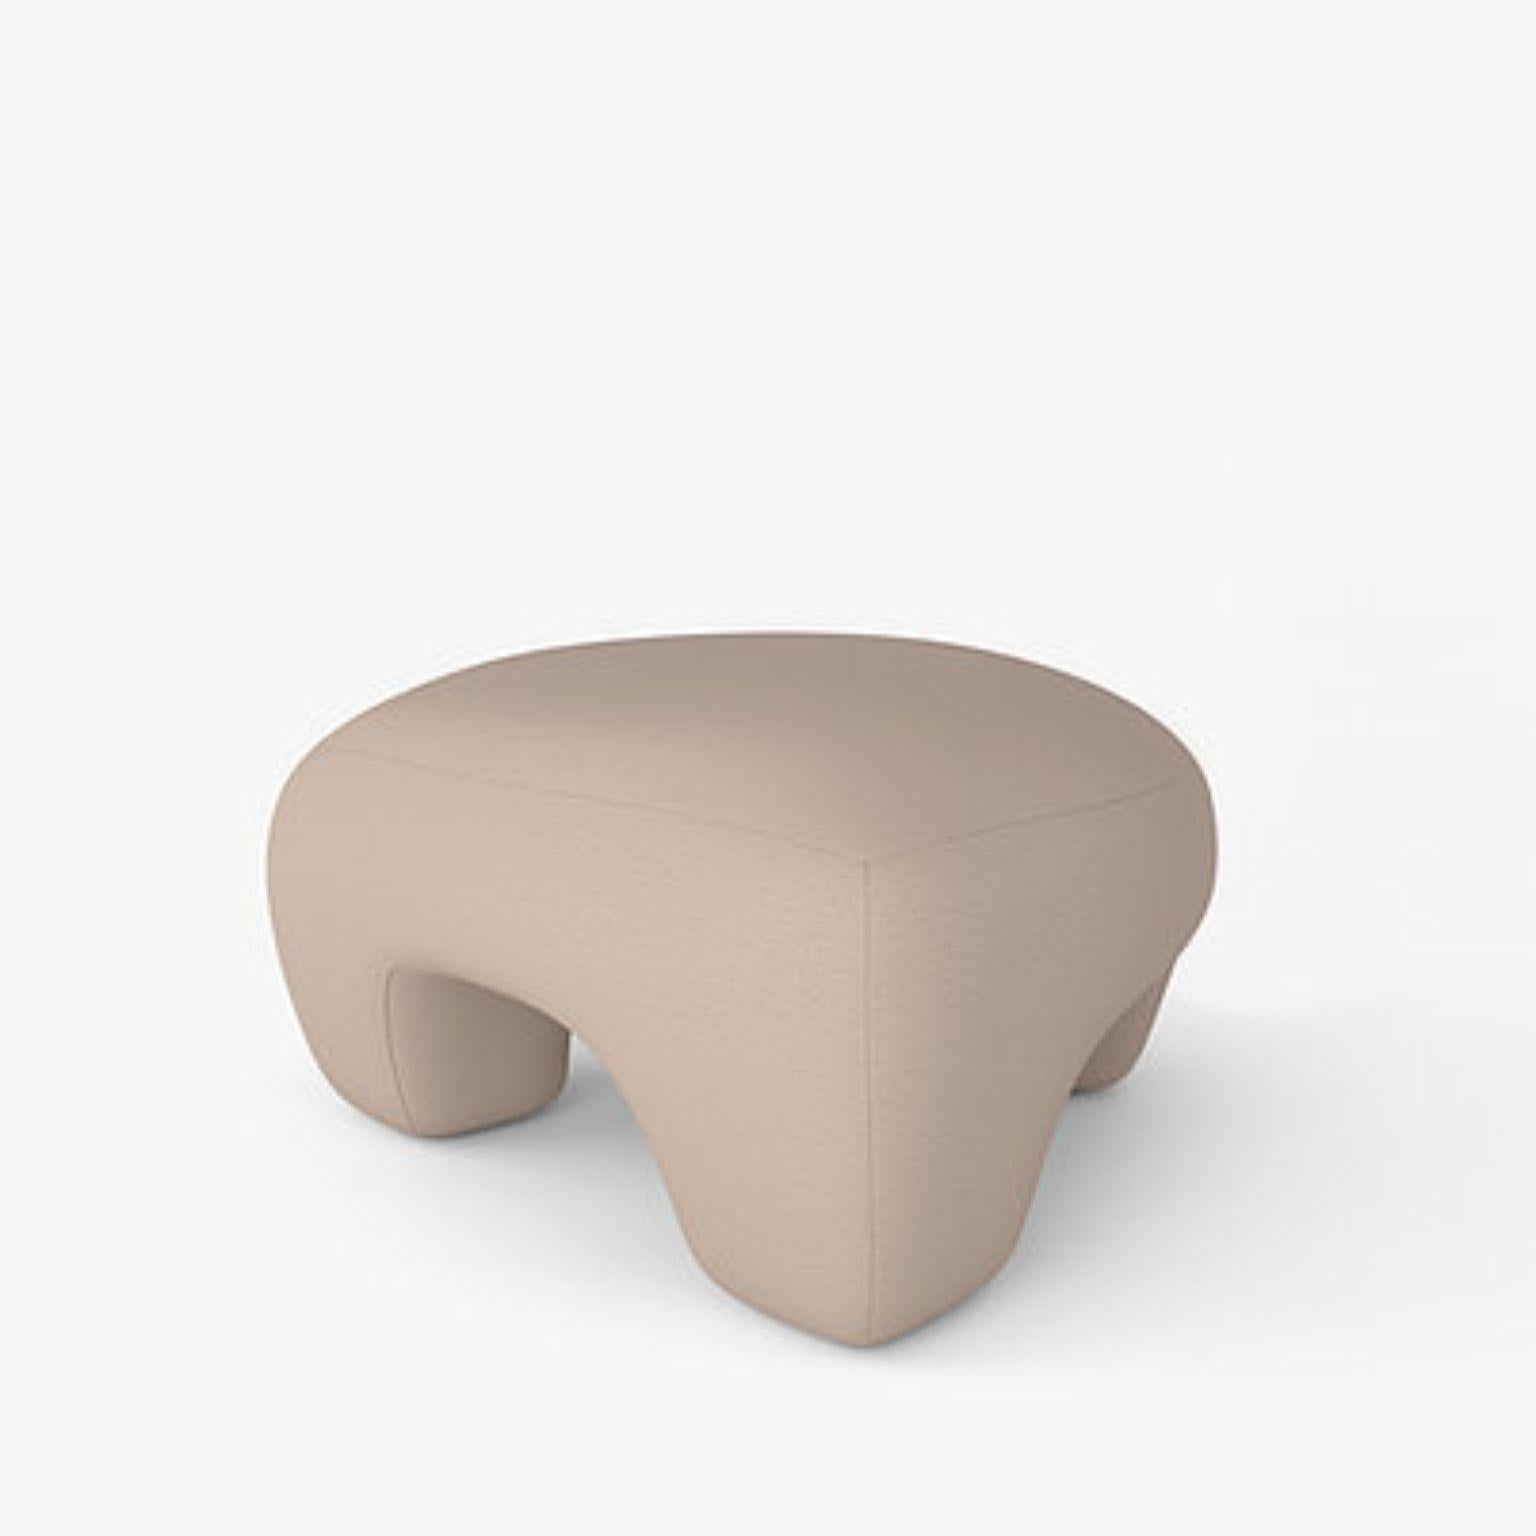 Contemporary ottoman by FAINA
Design: Victoriya Yakusha
Material: textile, foam rubber, sintepon
Dimensions: H 42 x W 80 x L 76 cm

In search of new-old design messages, Victoria Yakusha conducted a study of the daily traditions of our